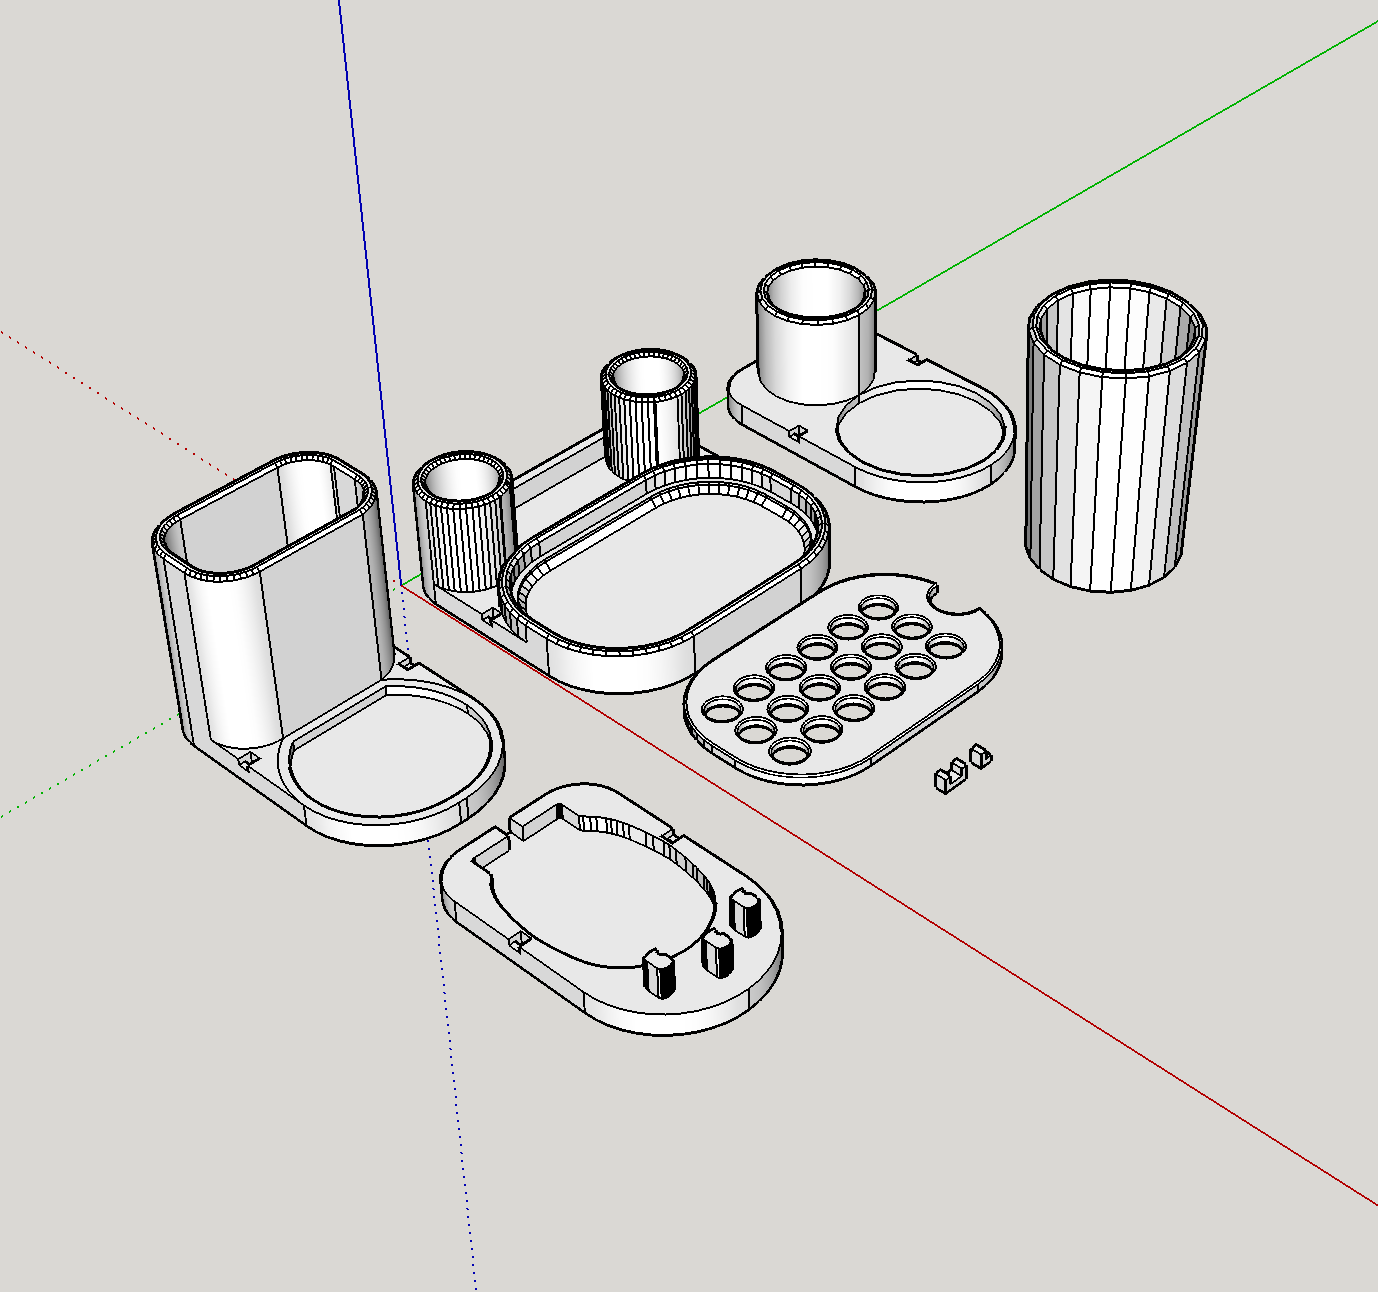 multisupport sbd.png Download free STL file BATHROOM ASSEMBLY ASSEMBLY • 3D printing template, Med